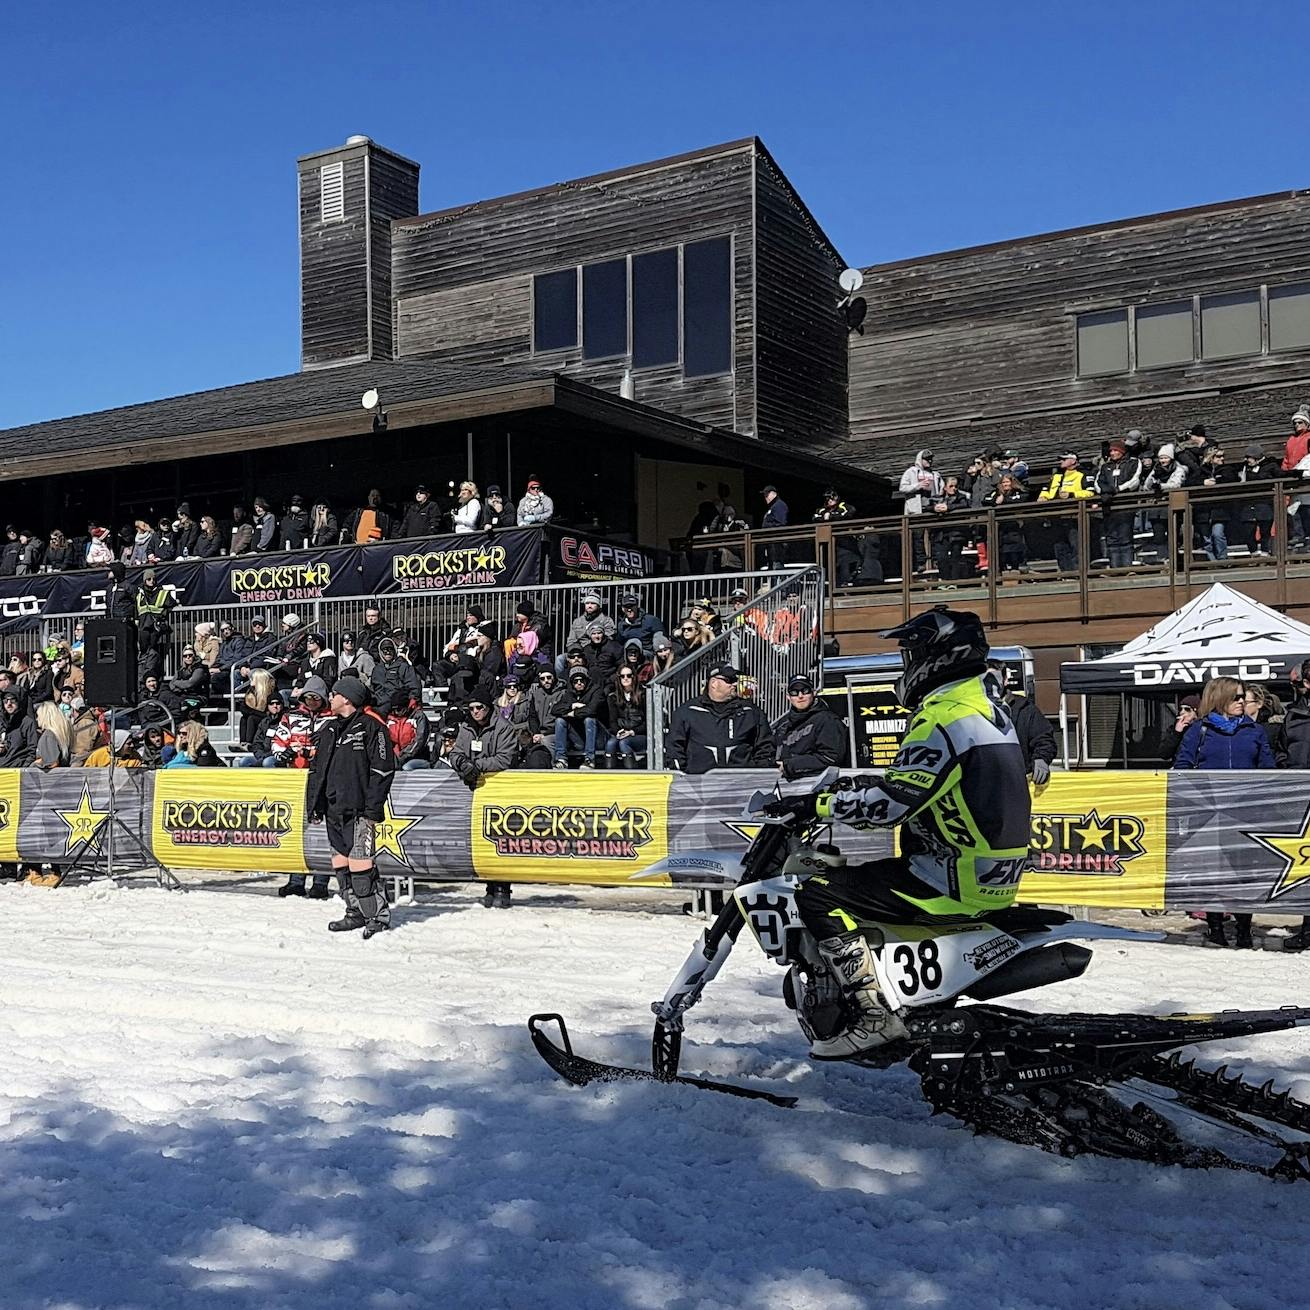 Snowmobile special events with a crowd watching a rider